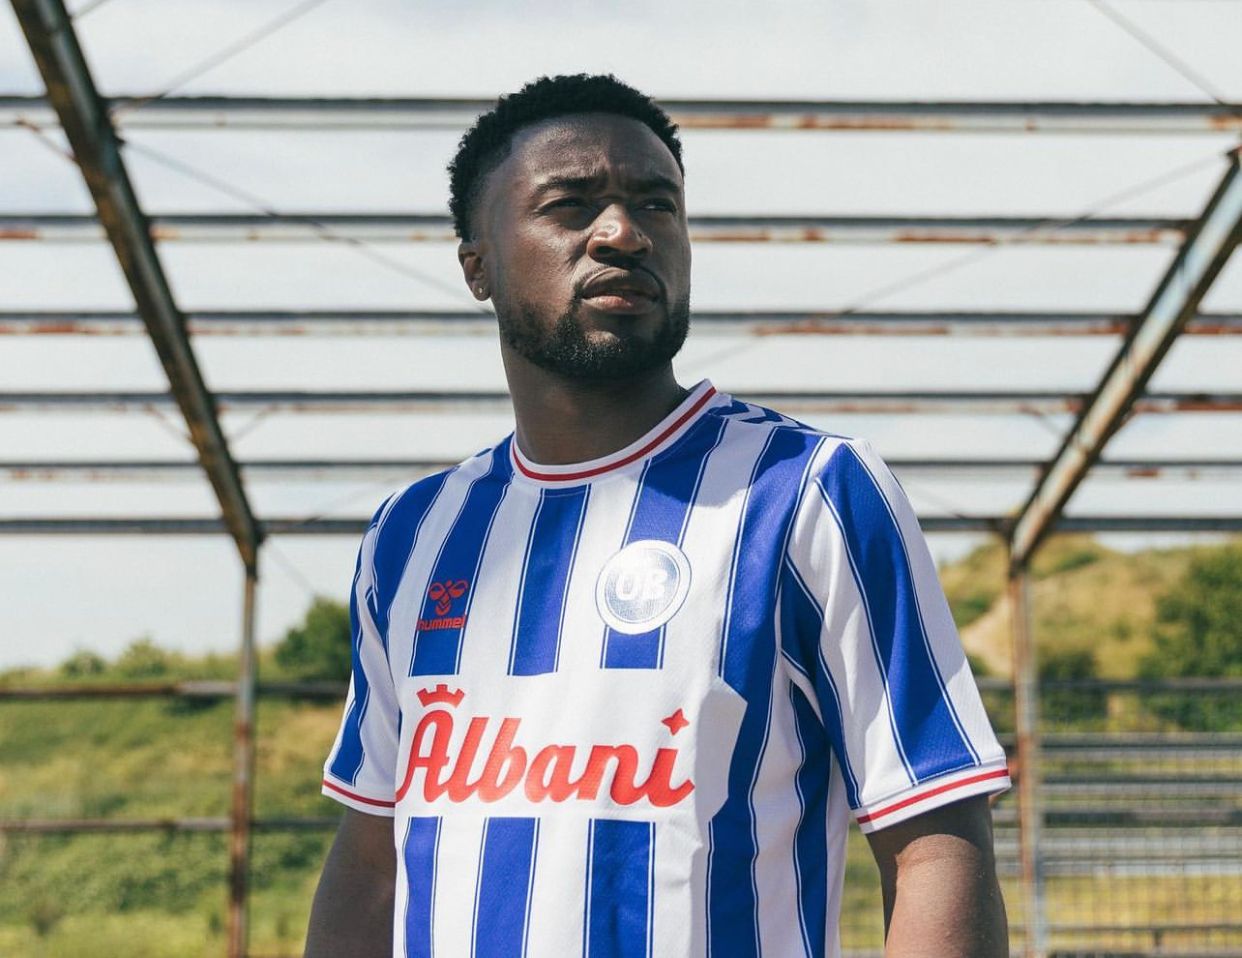 'We expect Leeroy Owusu to play his best football from day one' - Odense Boldklub director